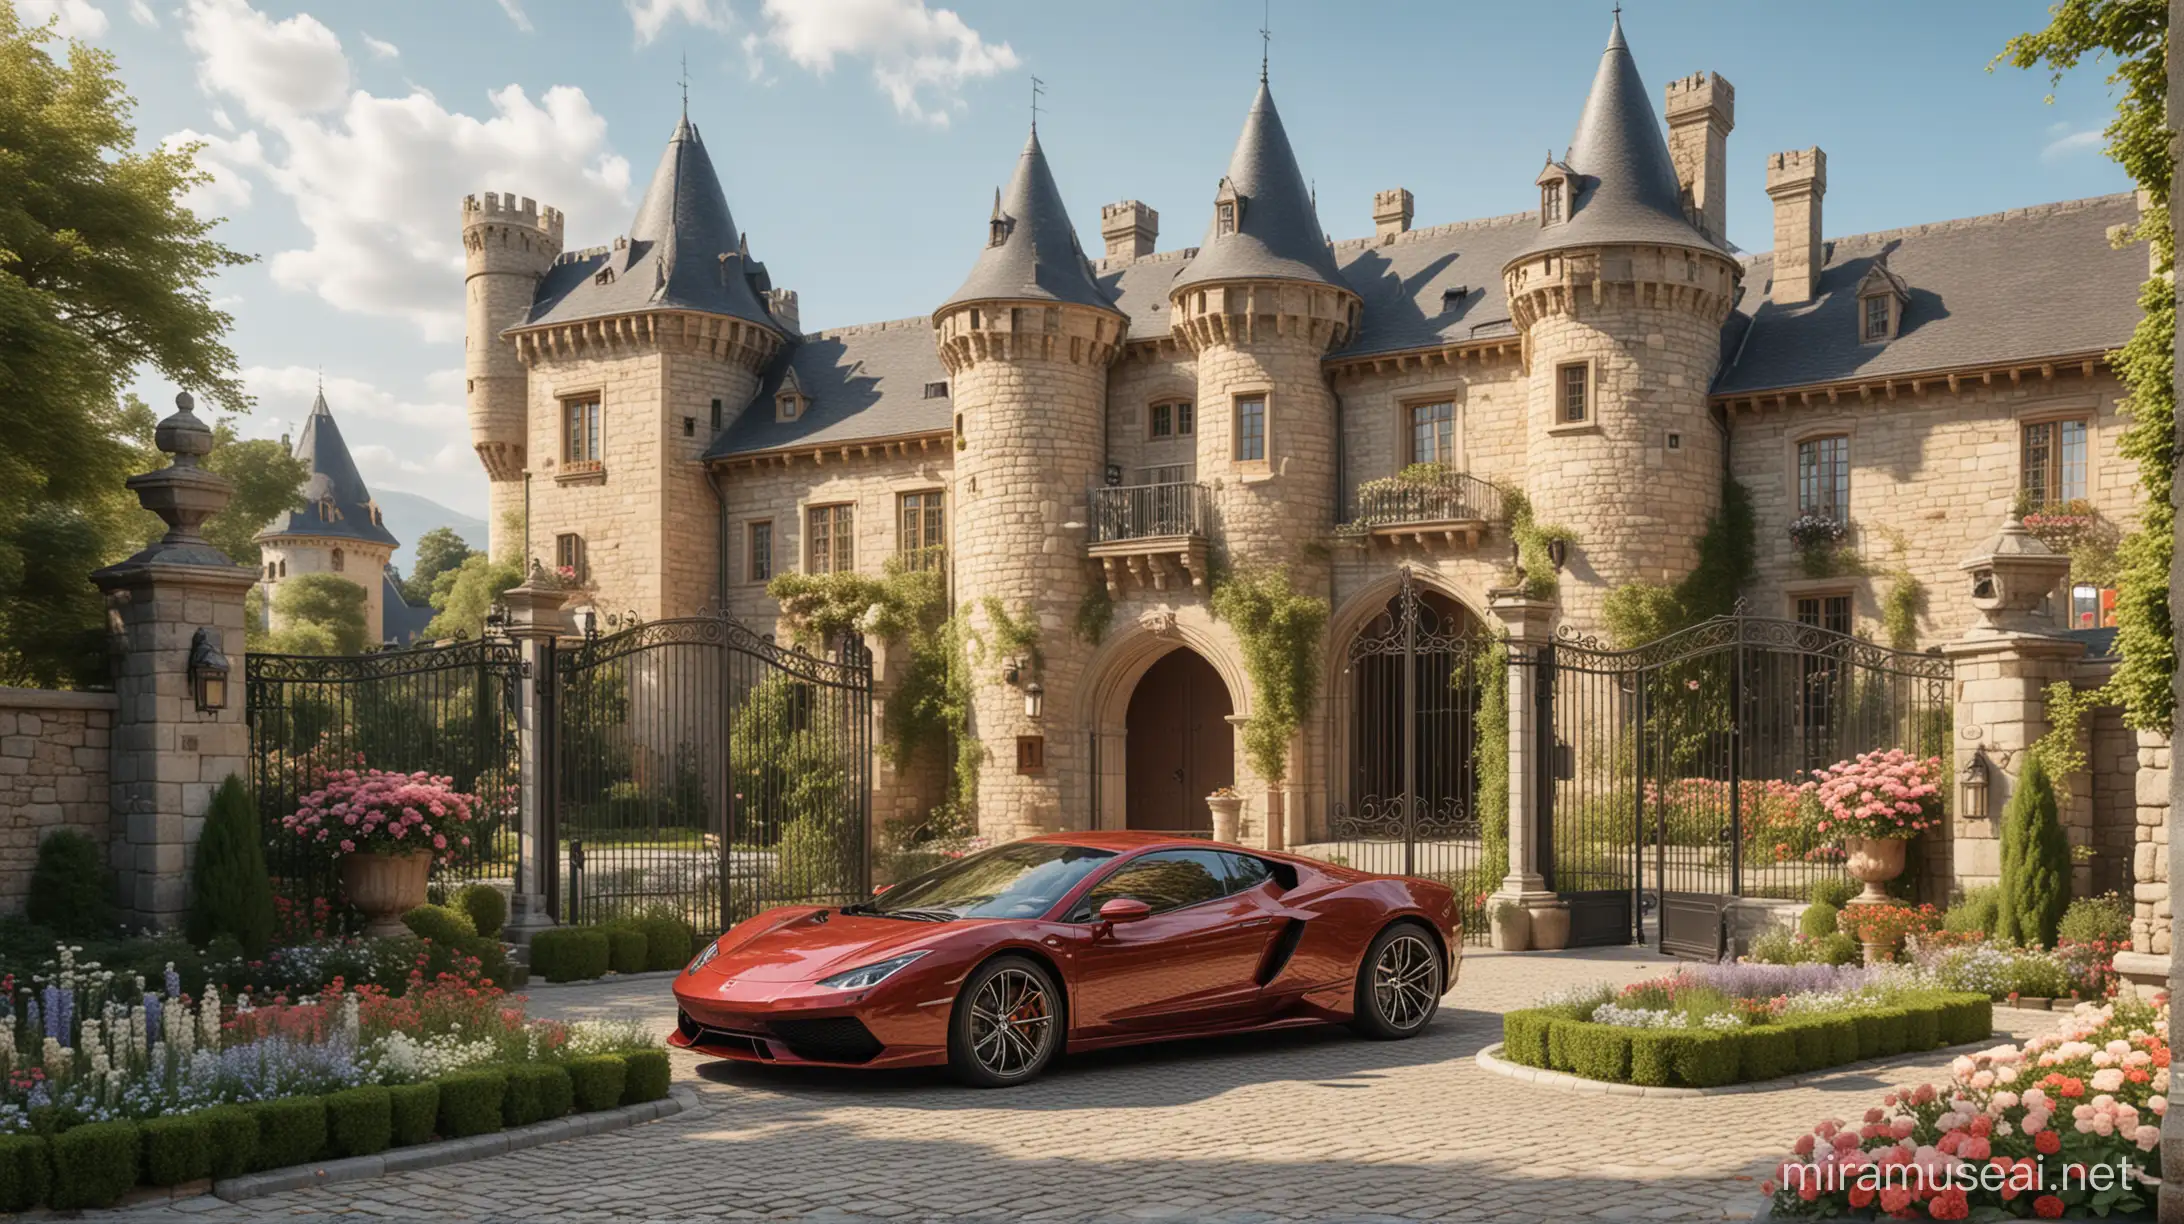 Luxurious Ancient Castle with Flower Garden and Luxury Sports Car